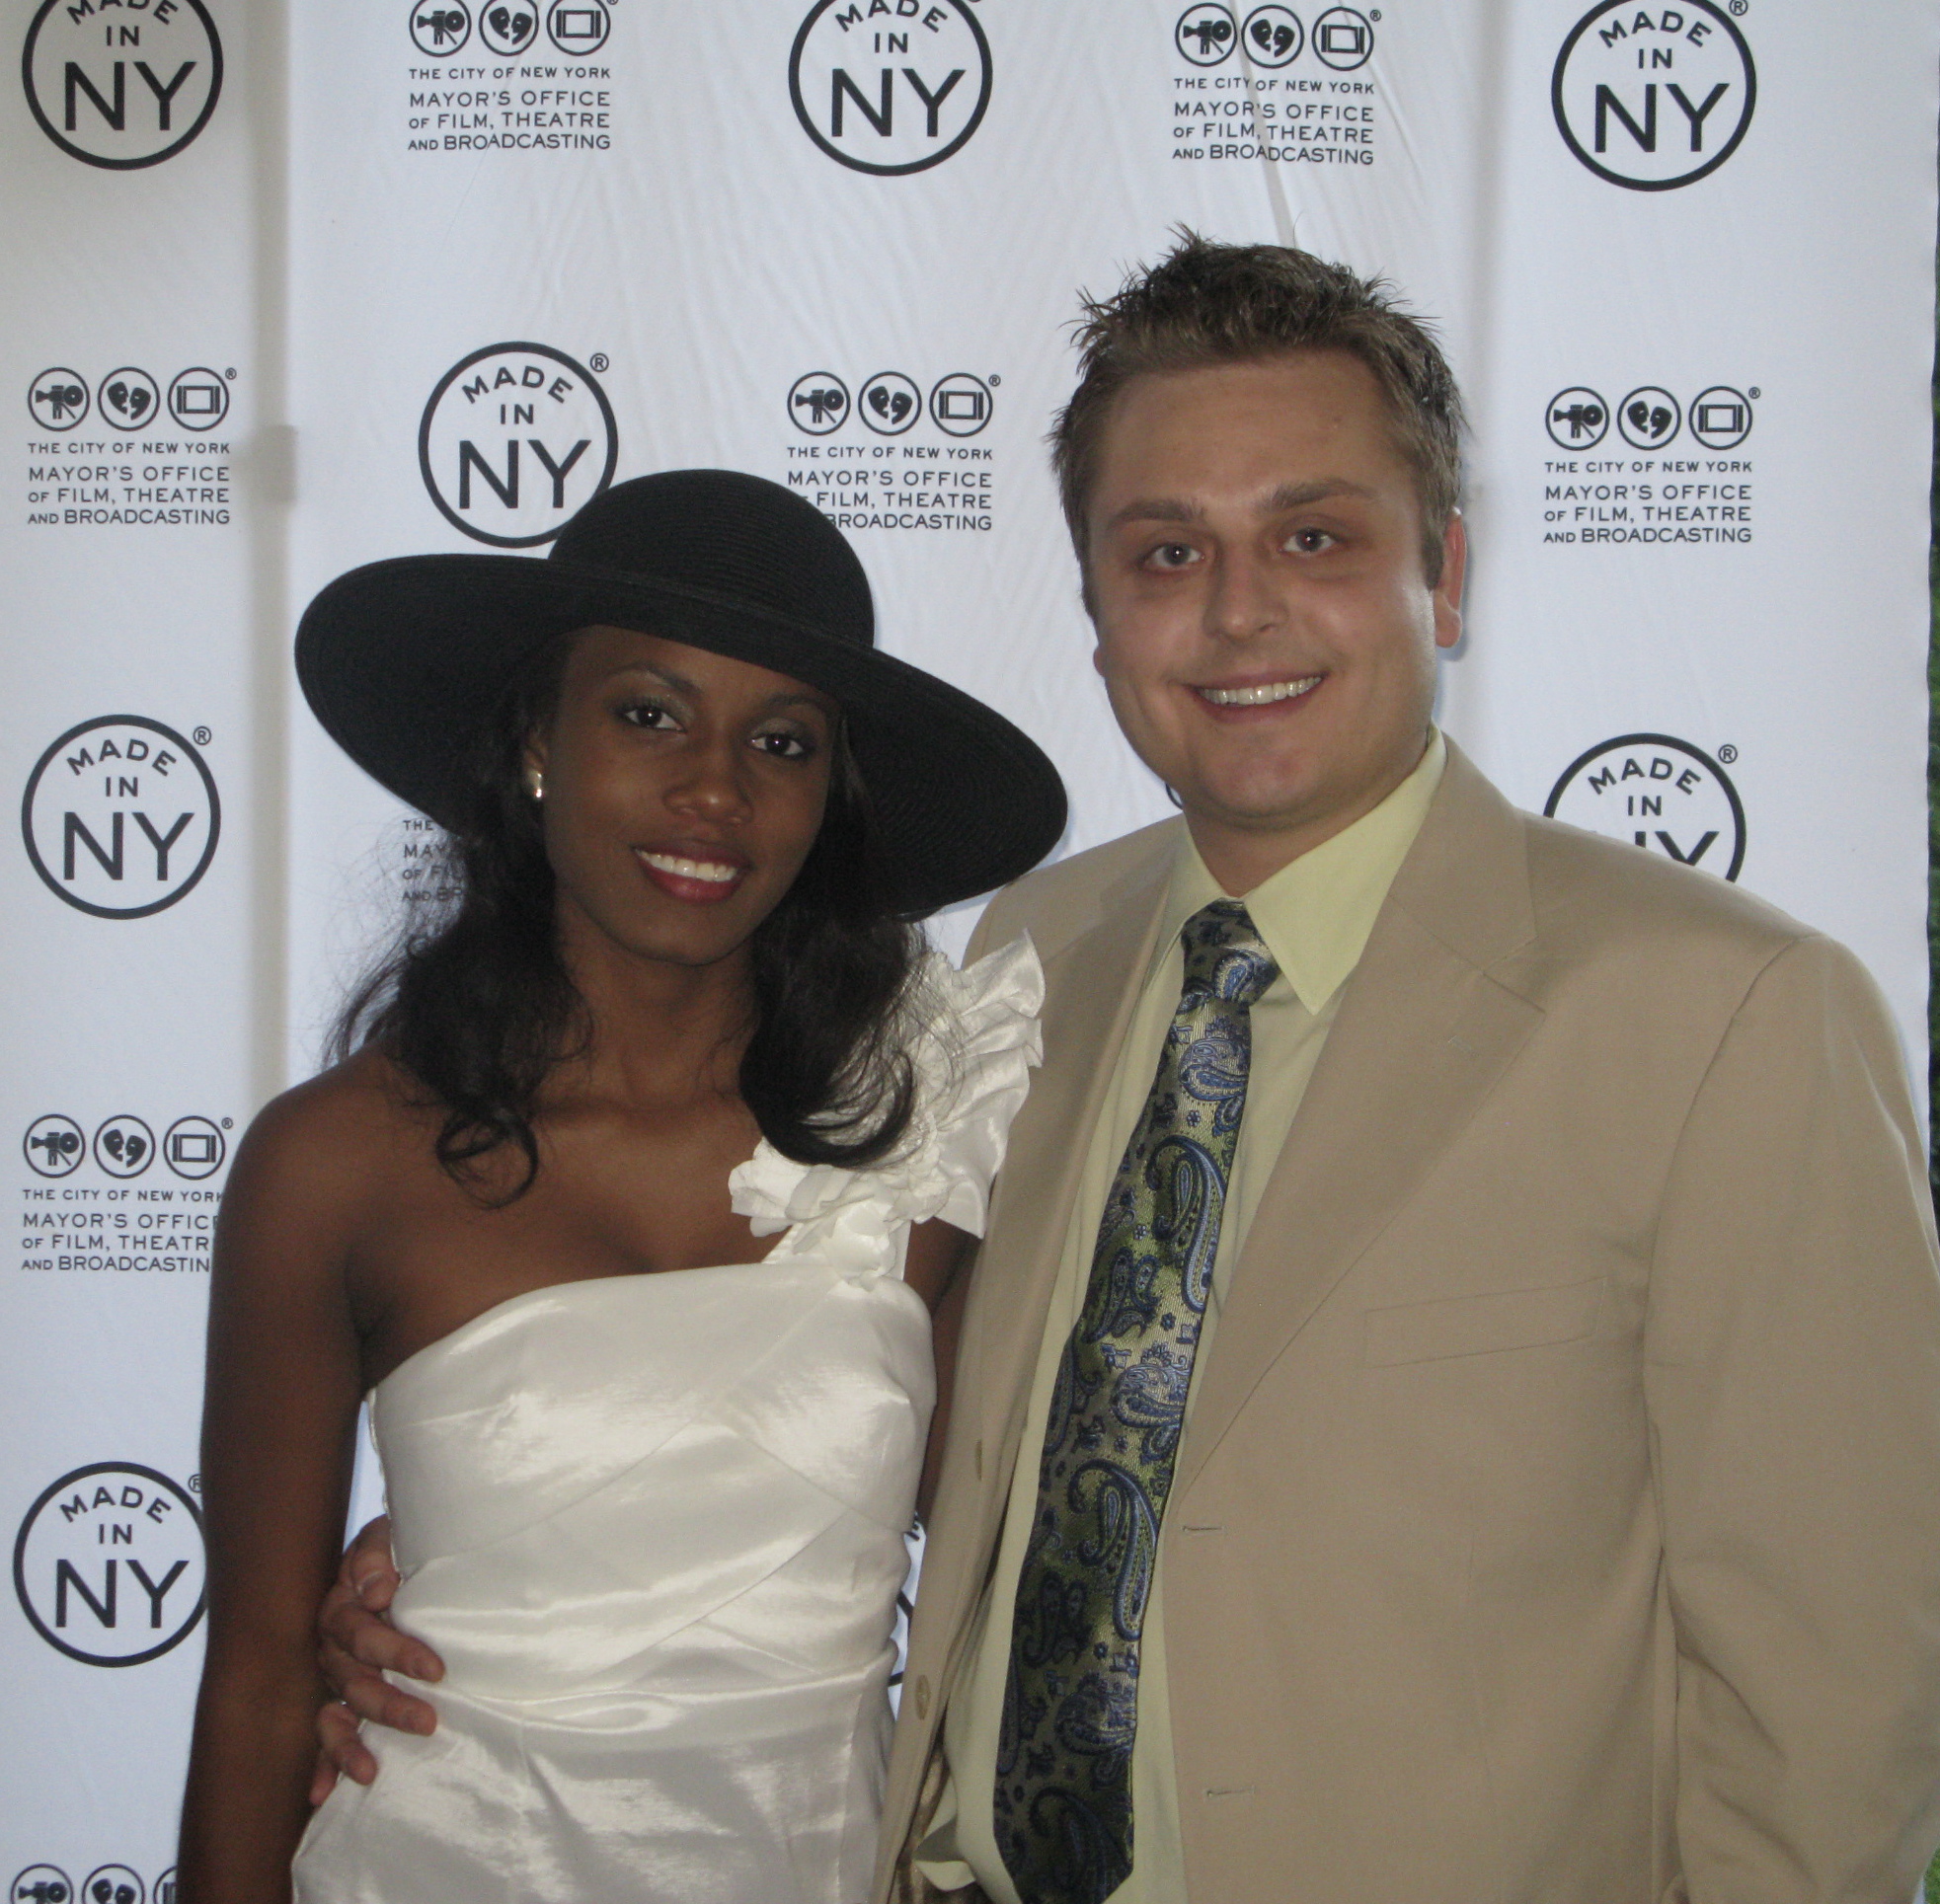 Josh Shull and Monique Wright attend the 5th Annual Made in New York Film Awards at Gracie Mansion